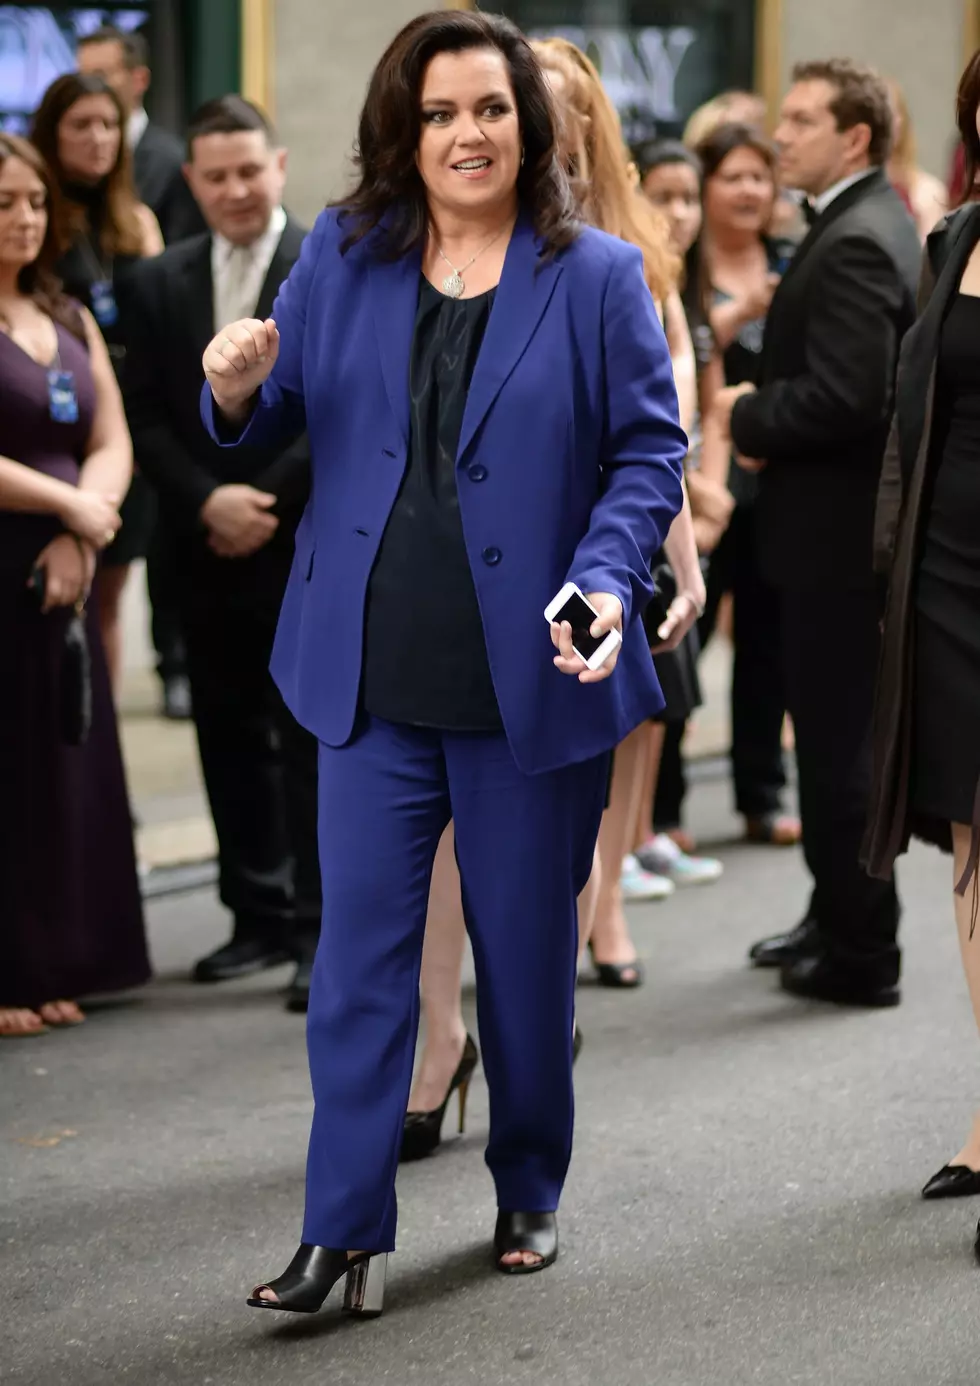 Rosie O&#8217;Donnell Is Returning To The View [VIDEO]